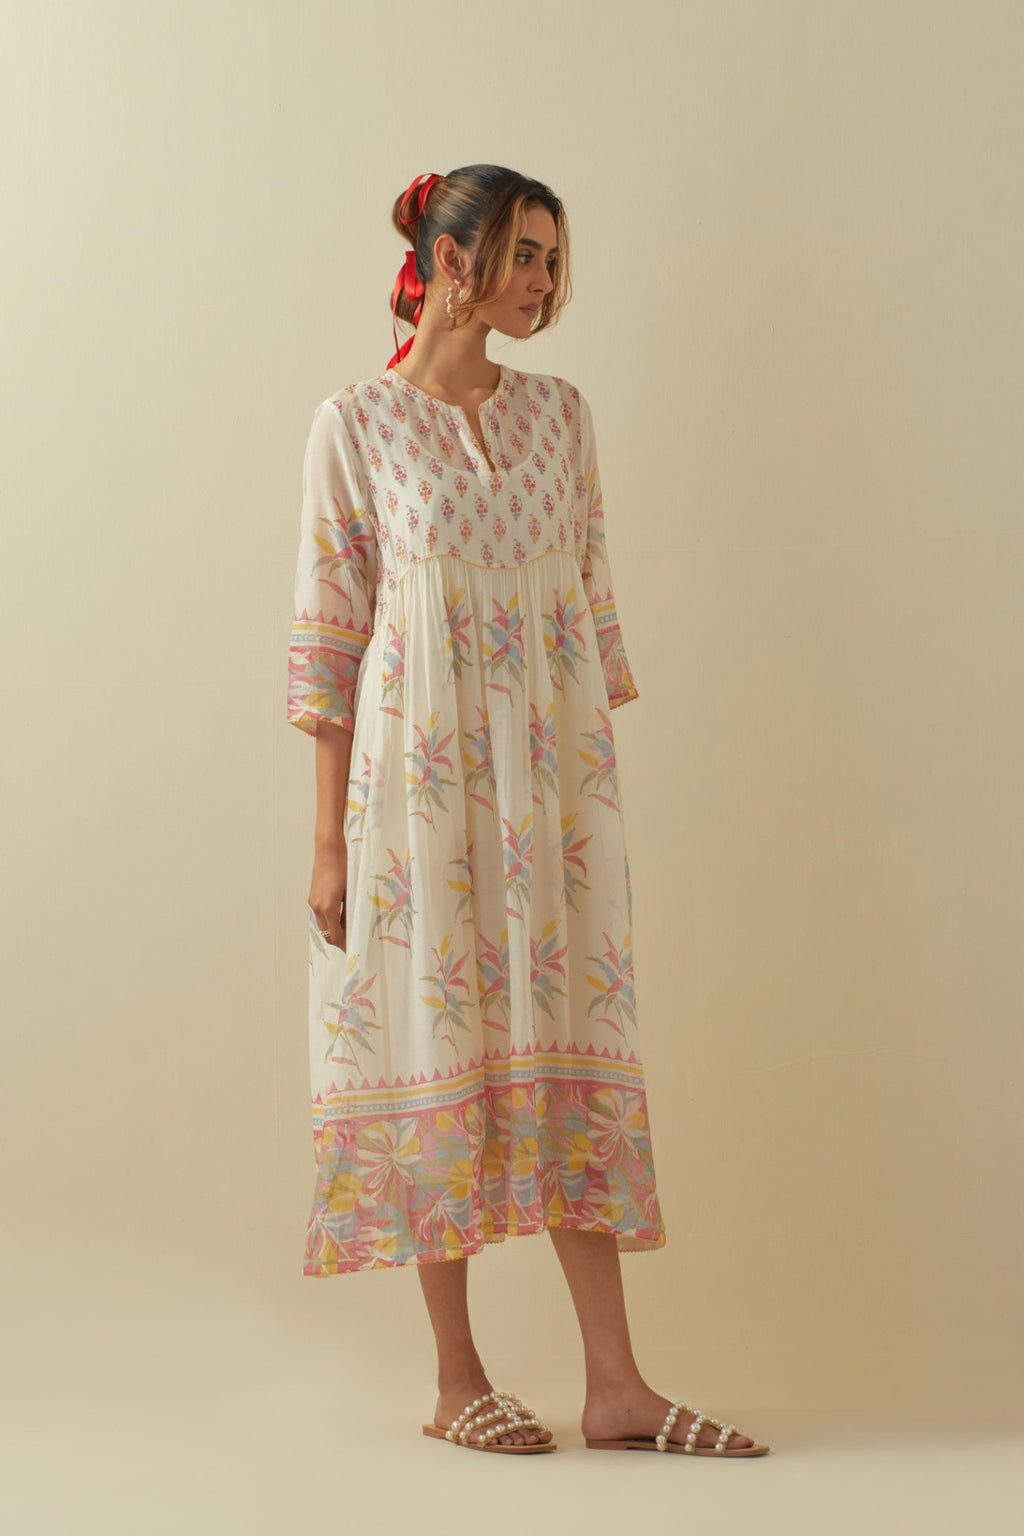 Off white cotton chanderi Kurta dress set with all-over assorted multi colored floral hand block print.